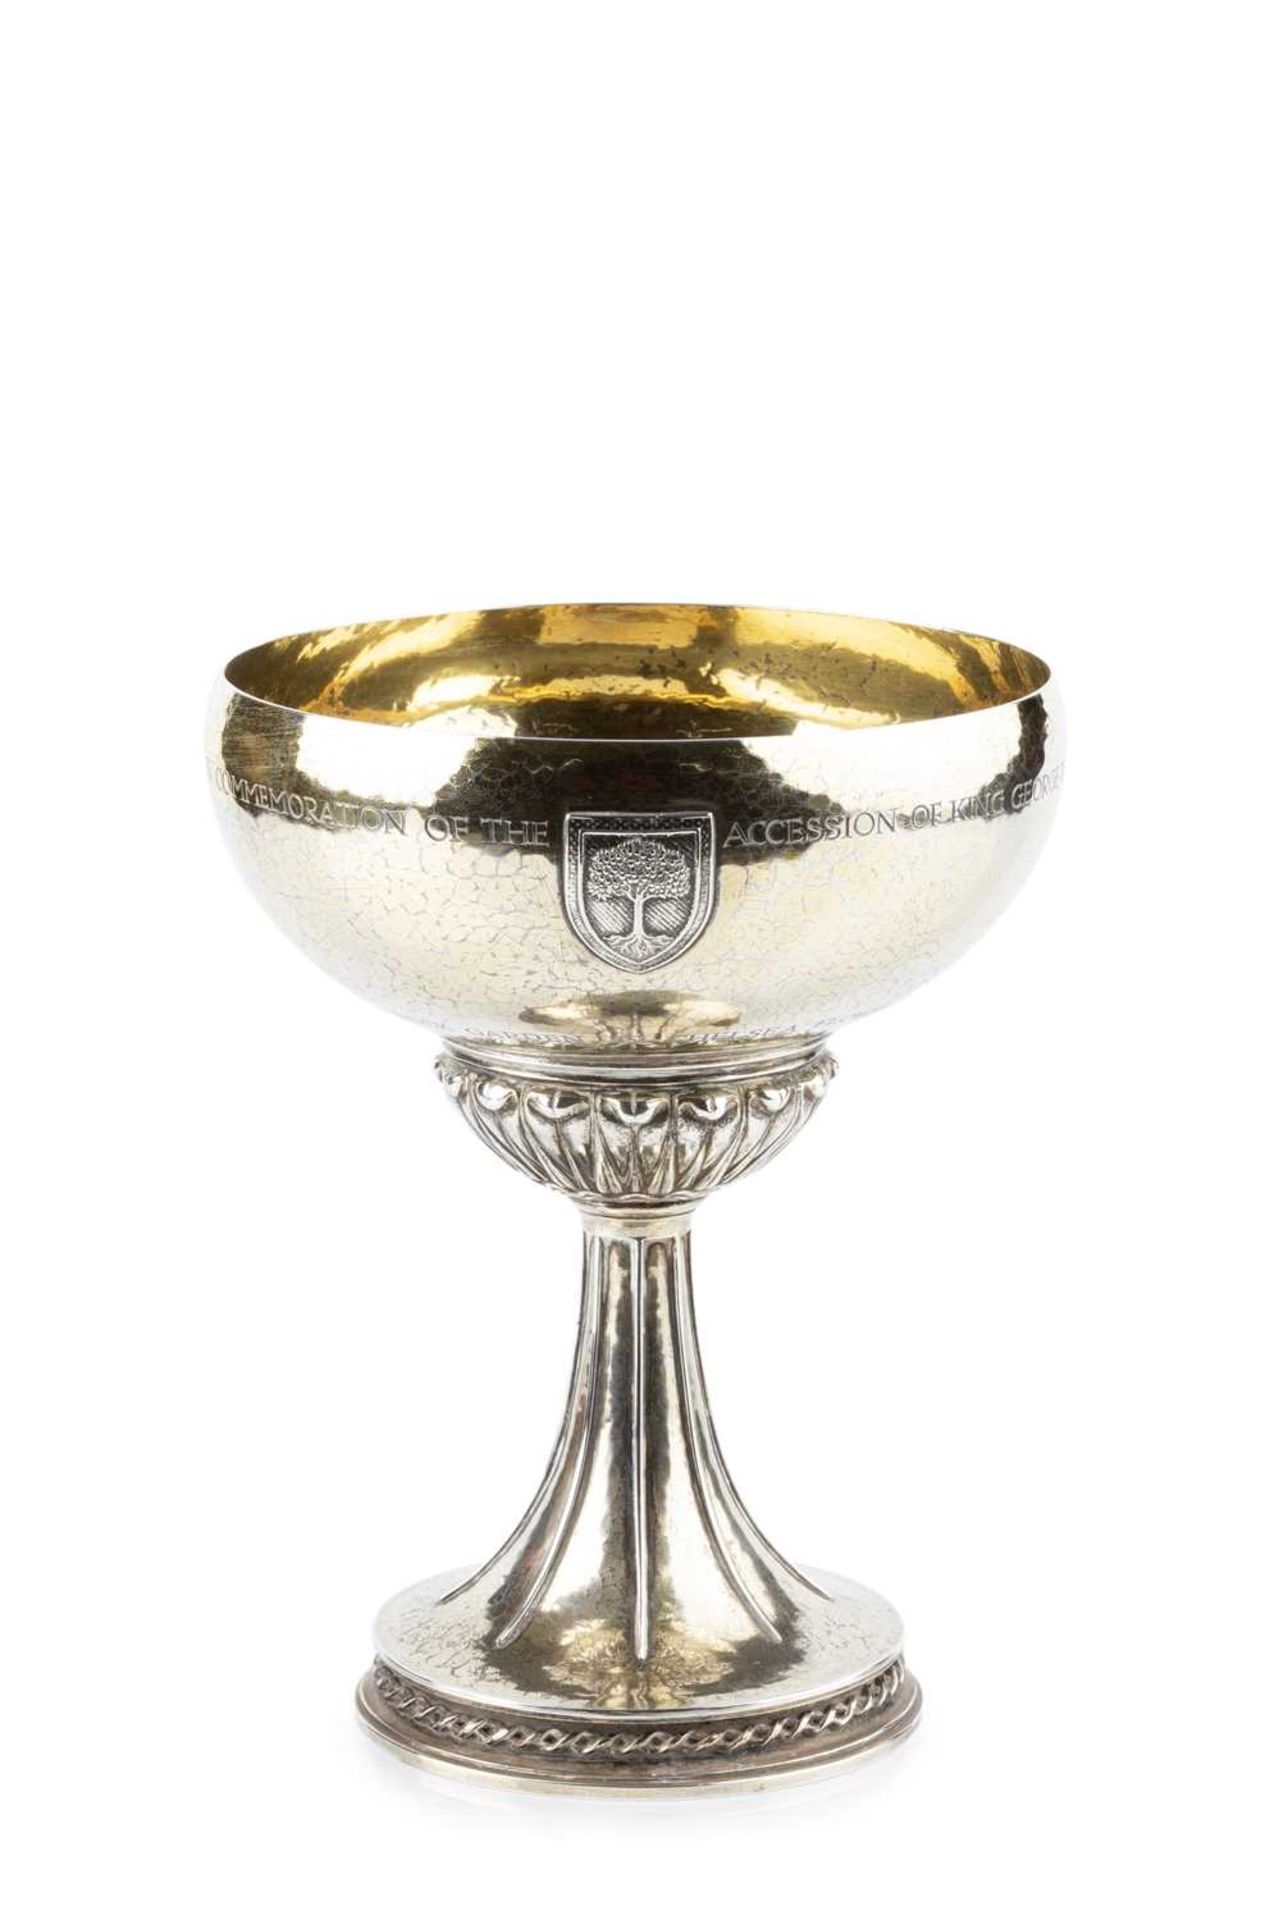 Omar Ramsden (1873-1939) Trophy for the Chelsea Flower Show Gold Prize 1937 silver and silver gilt